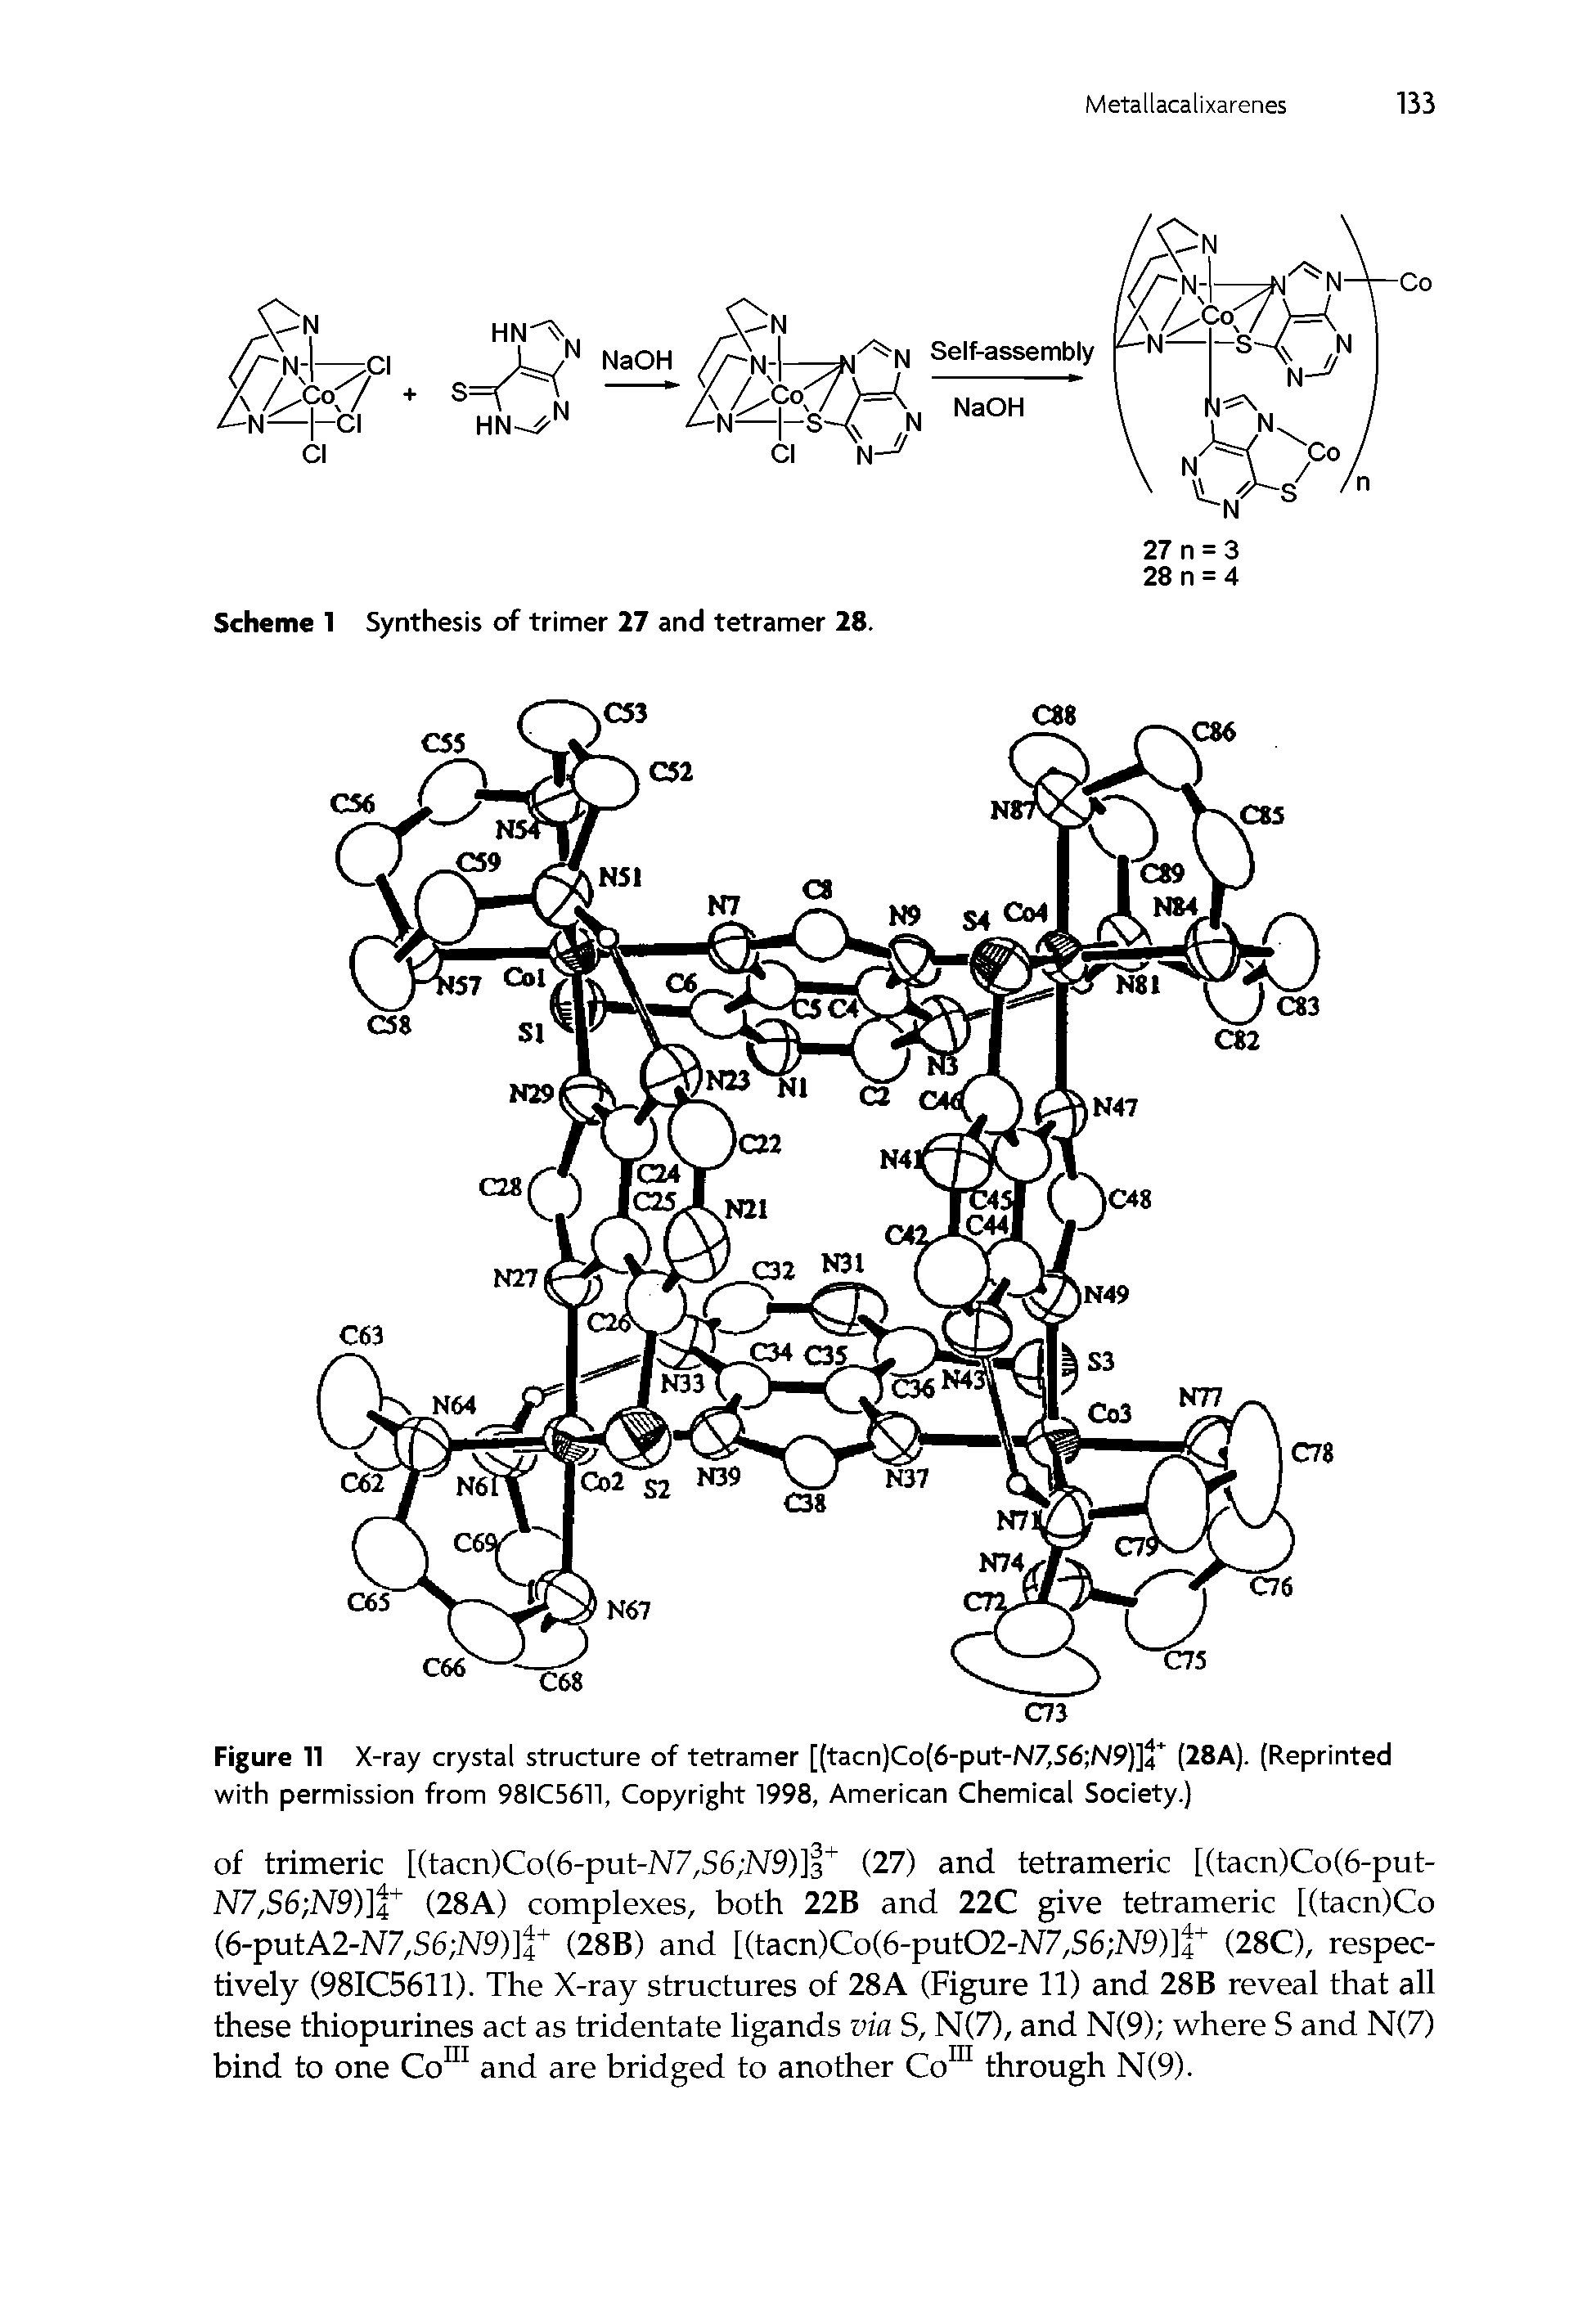 Figure 11 X-ray crystal structure of tetramer [(tacn)Co(6-put-N7,S6 N9)]4 (28A). (Reprinted with permission from 98IC5611, Copyright 1998, American Chemical Society.)...